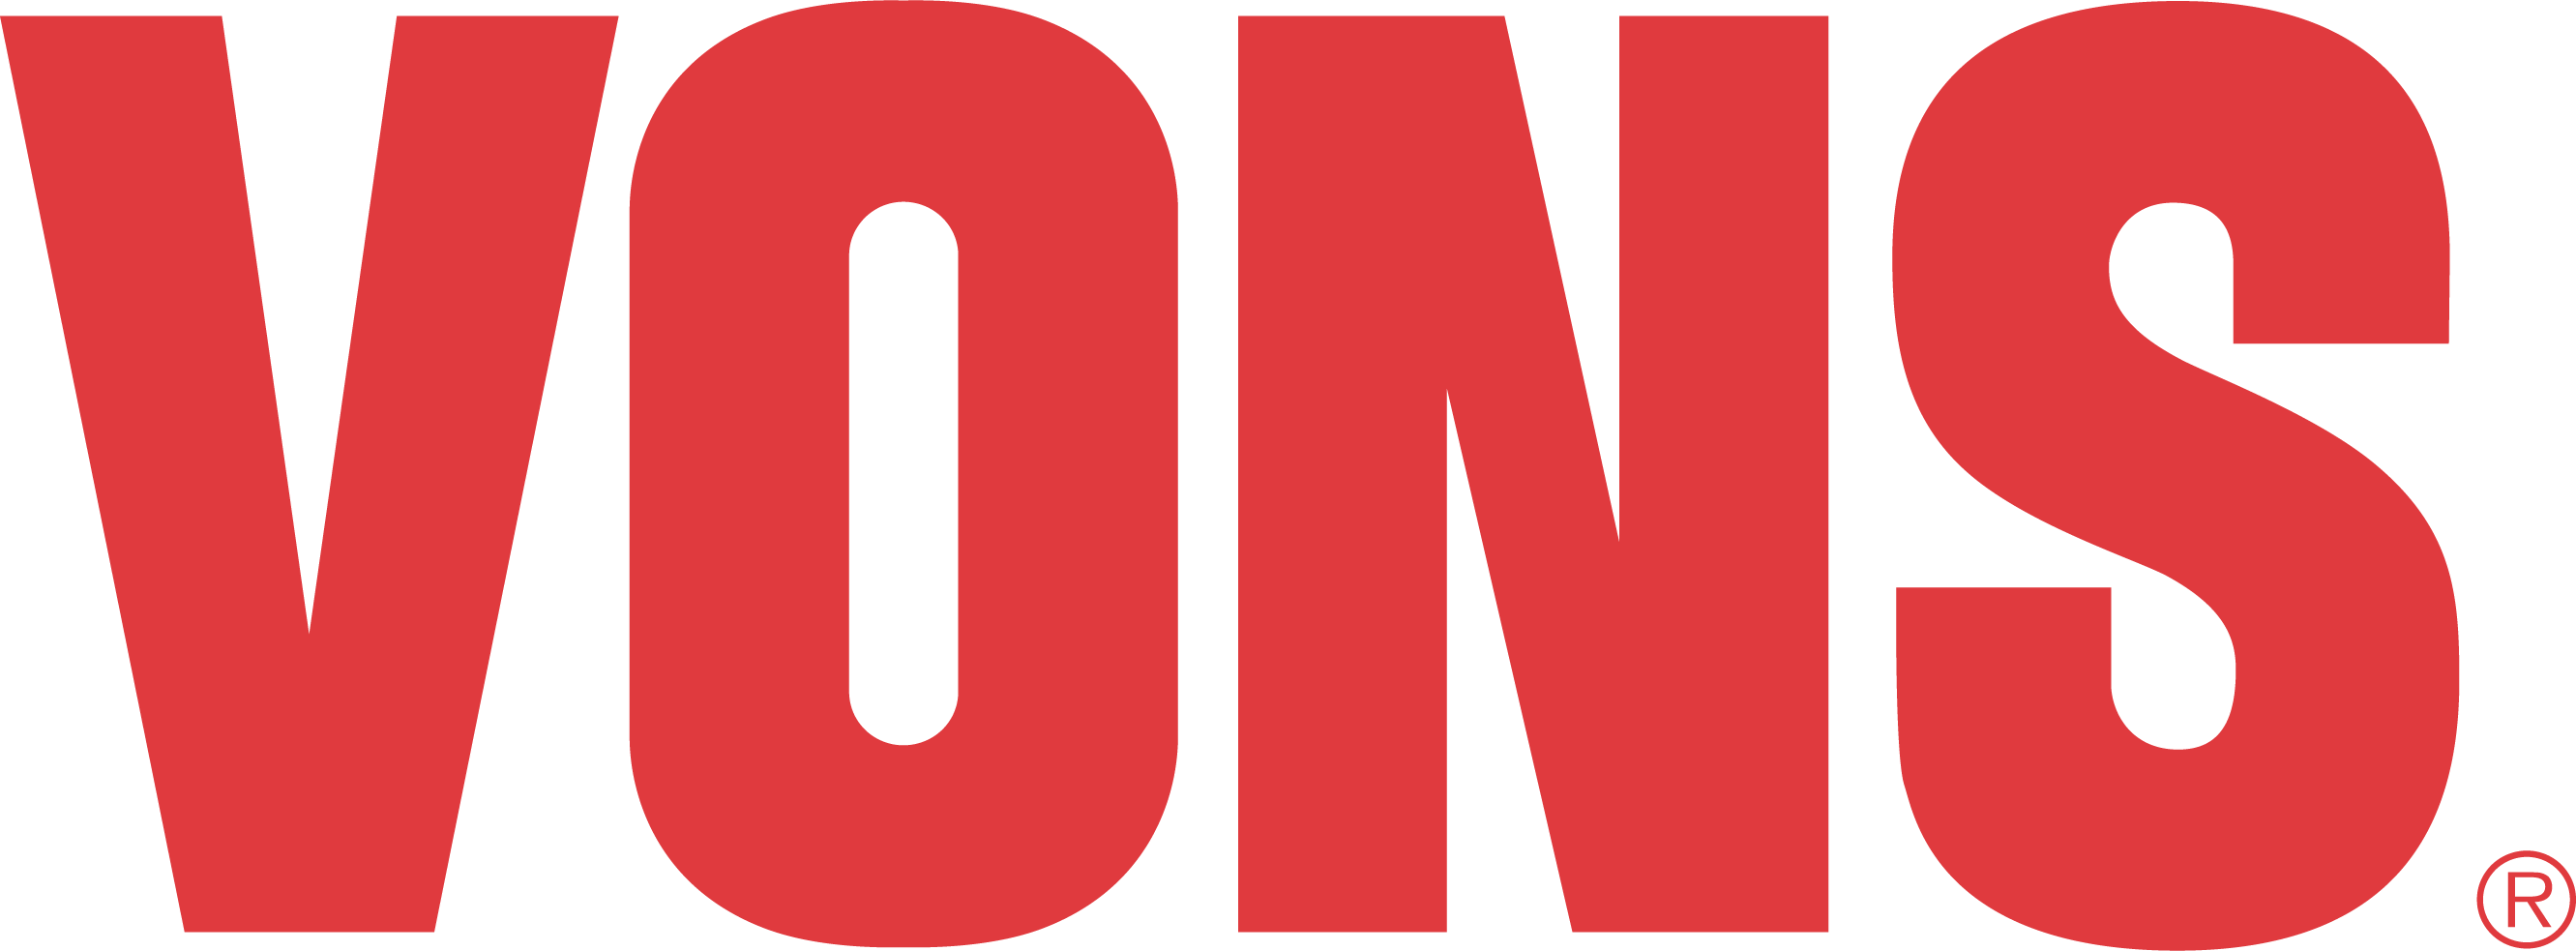 Vons Logo png